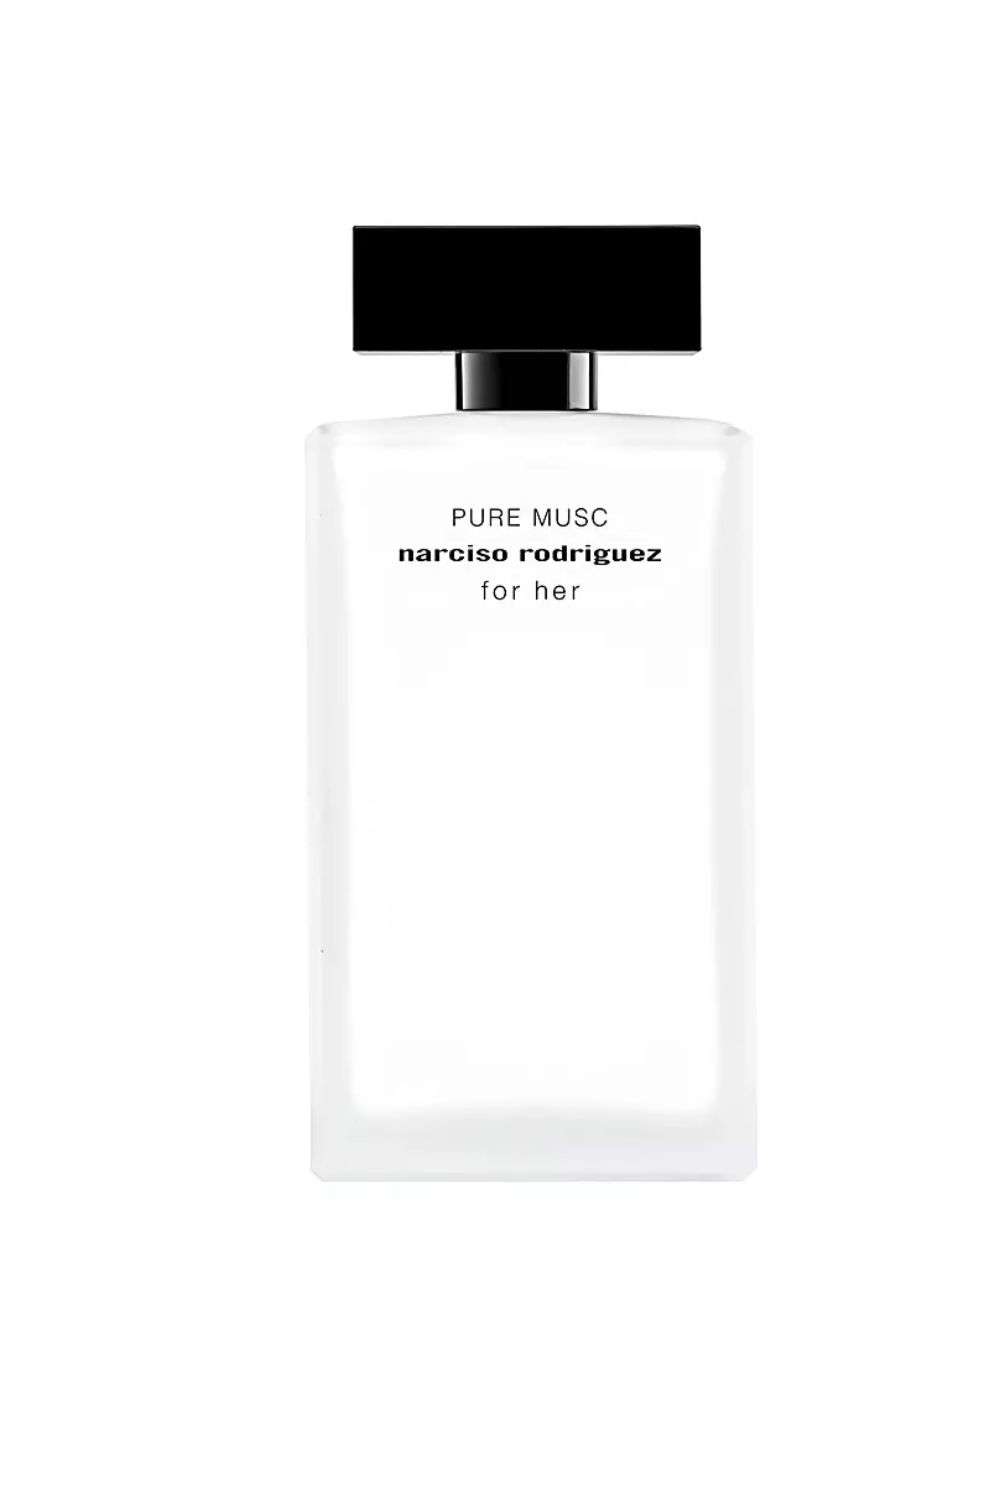 Narciso Rodriguez FOR HER PURE MUSC